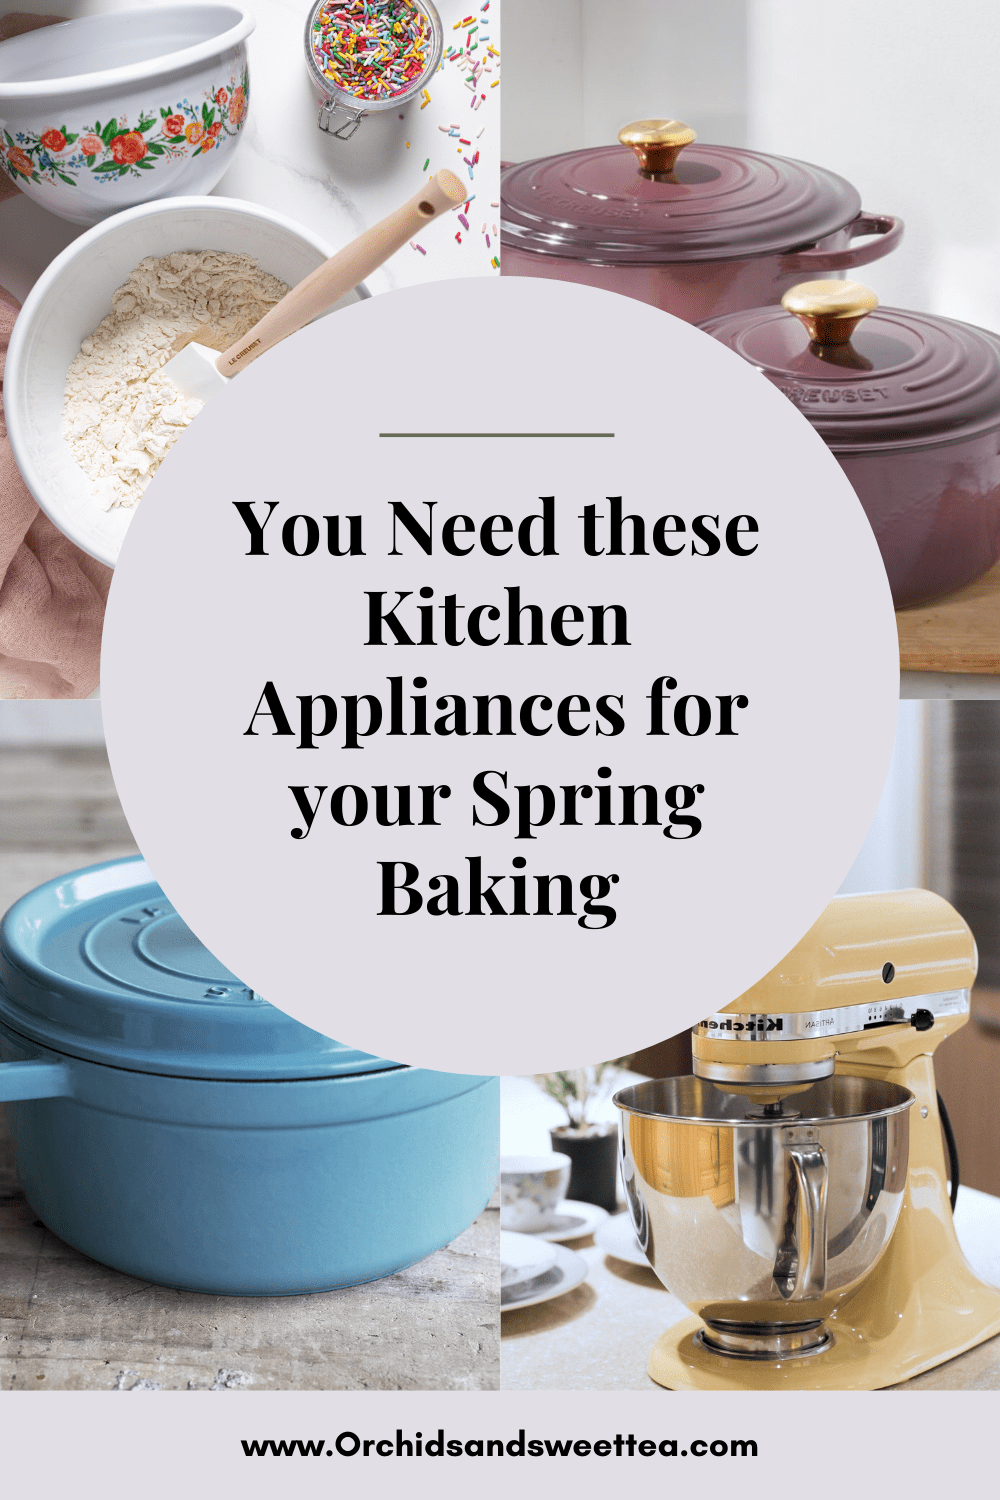 You Need these Kitchen Appliances for your Spring Baking